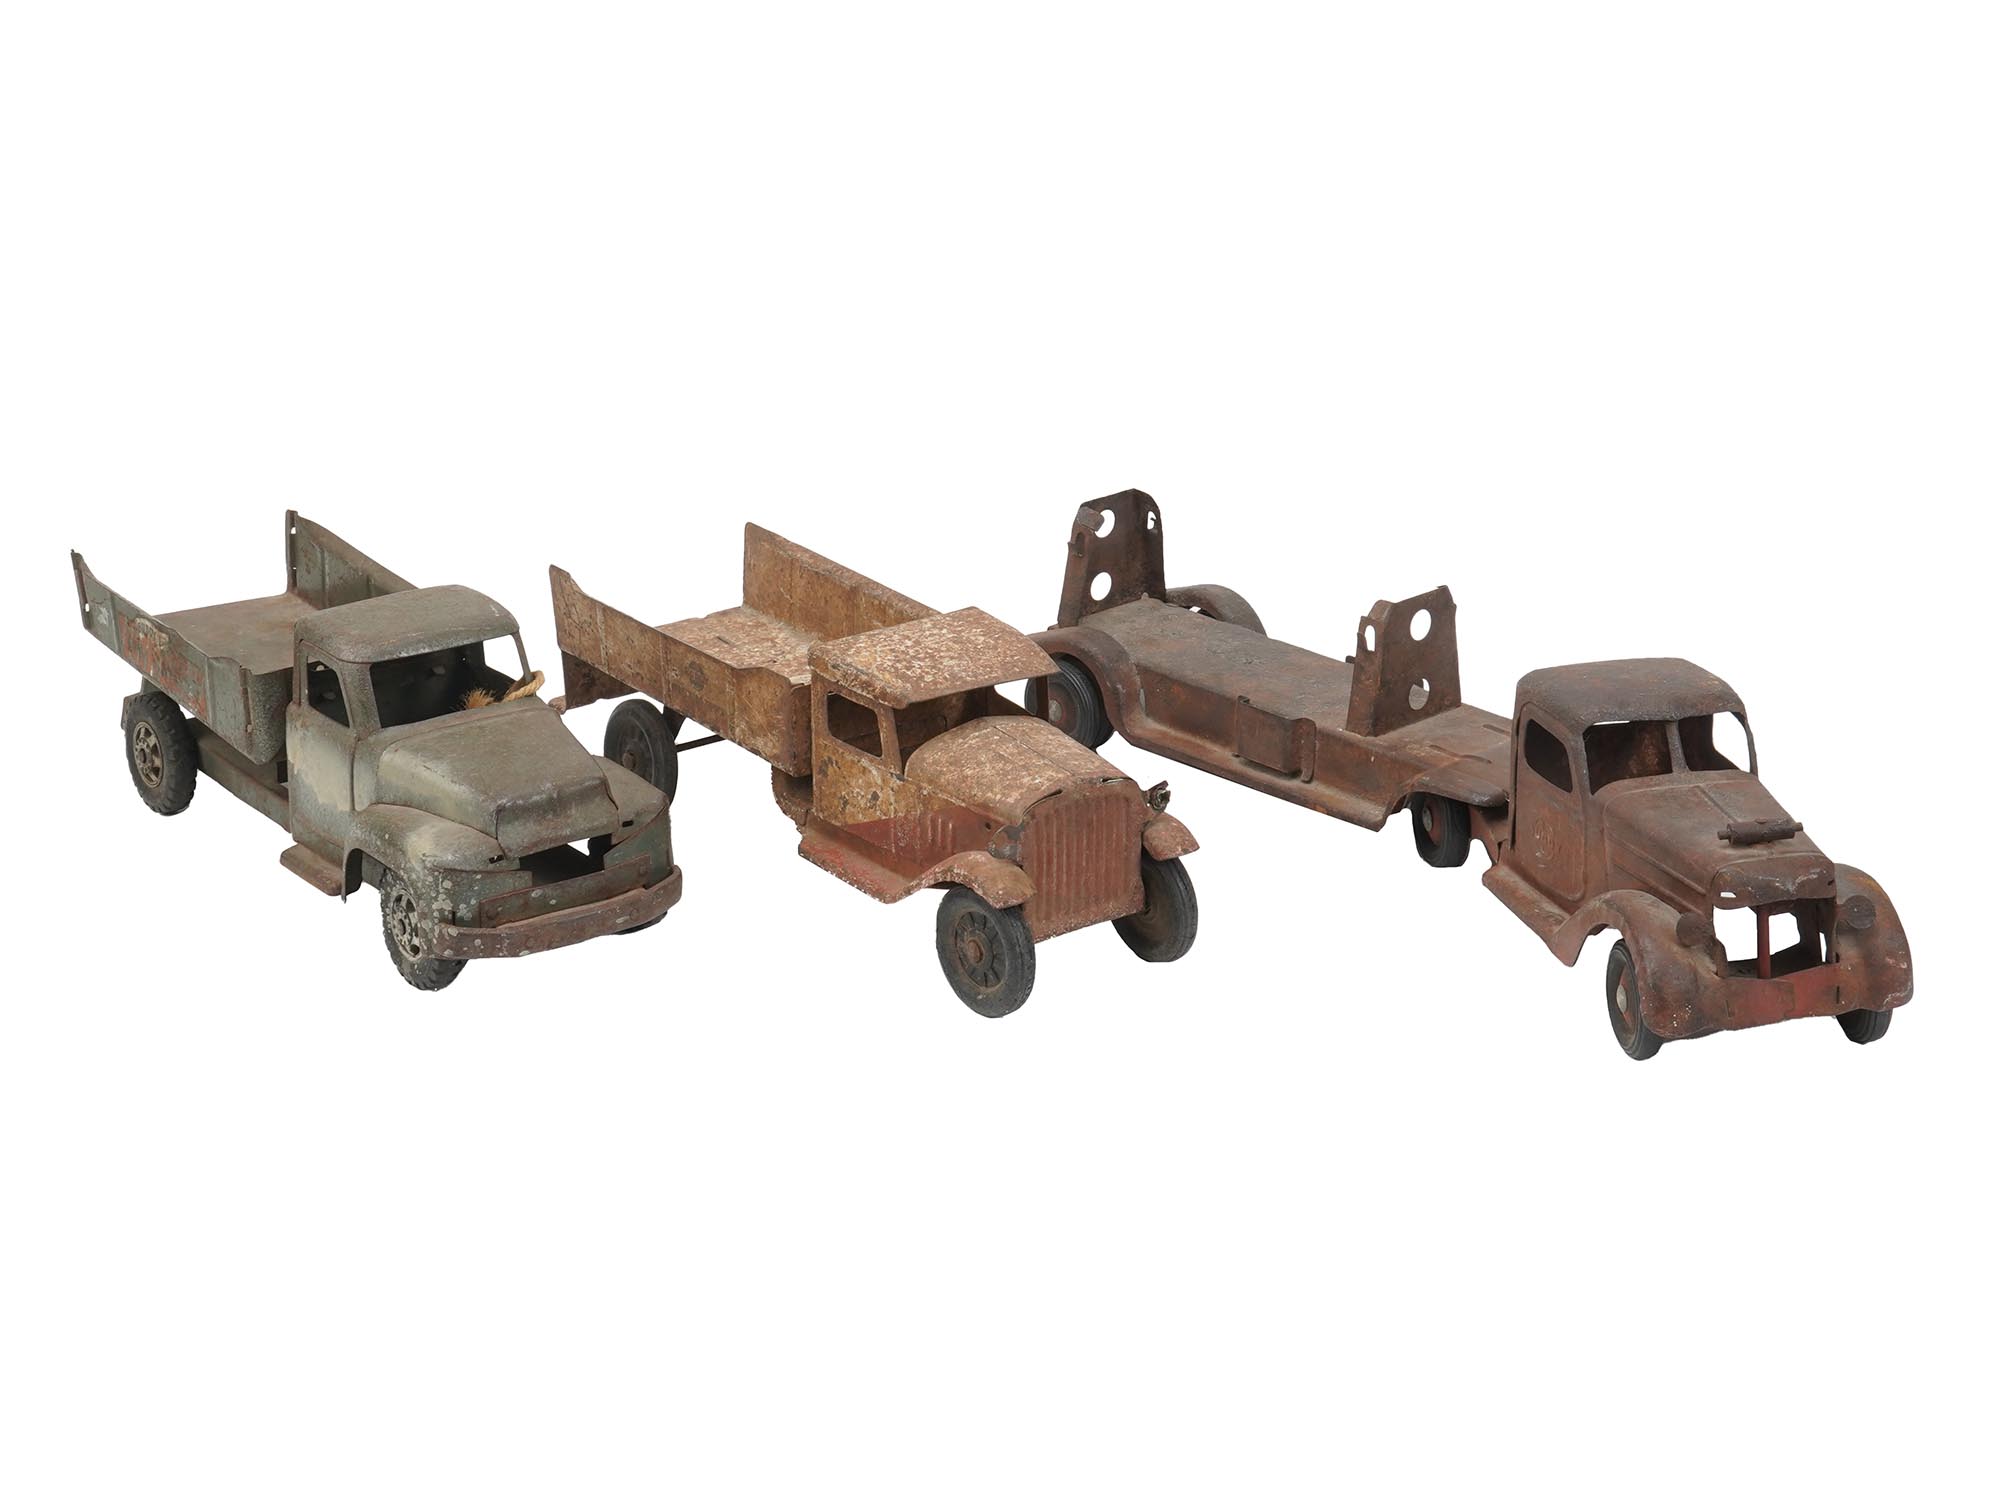 VINTAGE COLLECTIBLE METAL TRUCK TOYS PIC-0